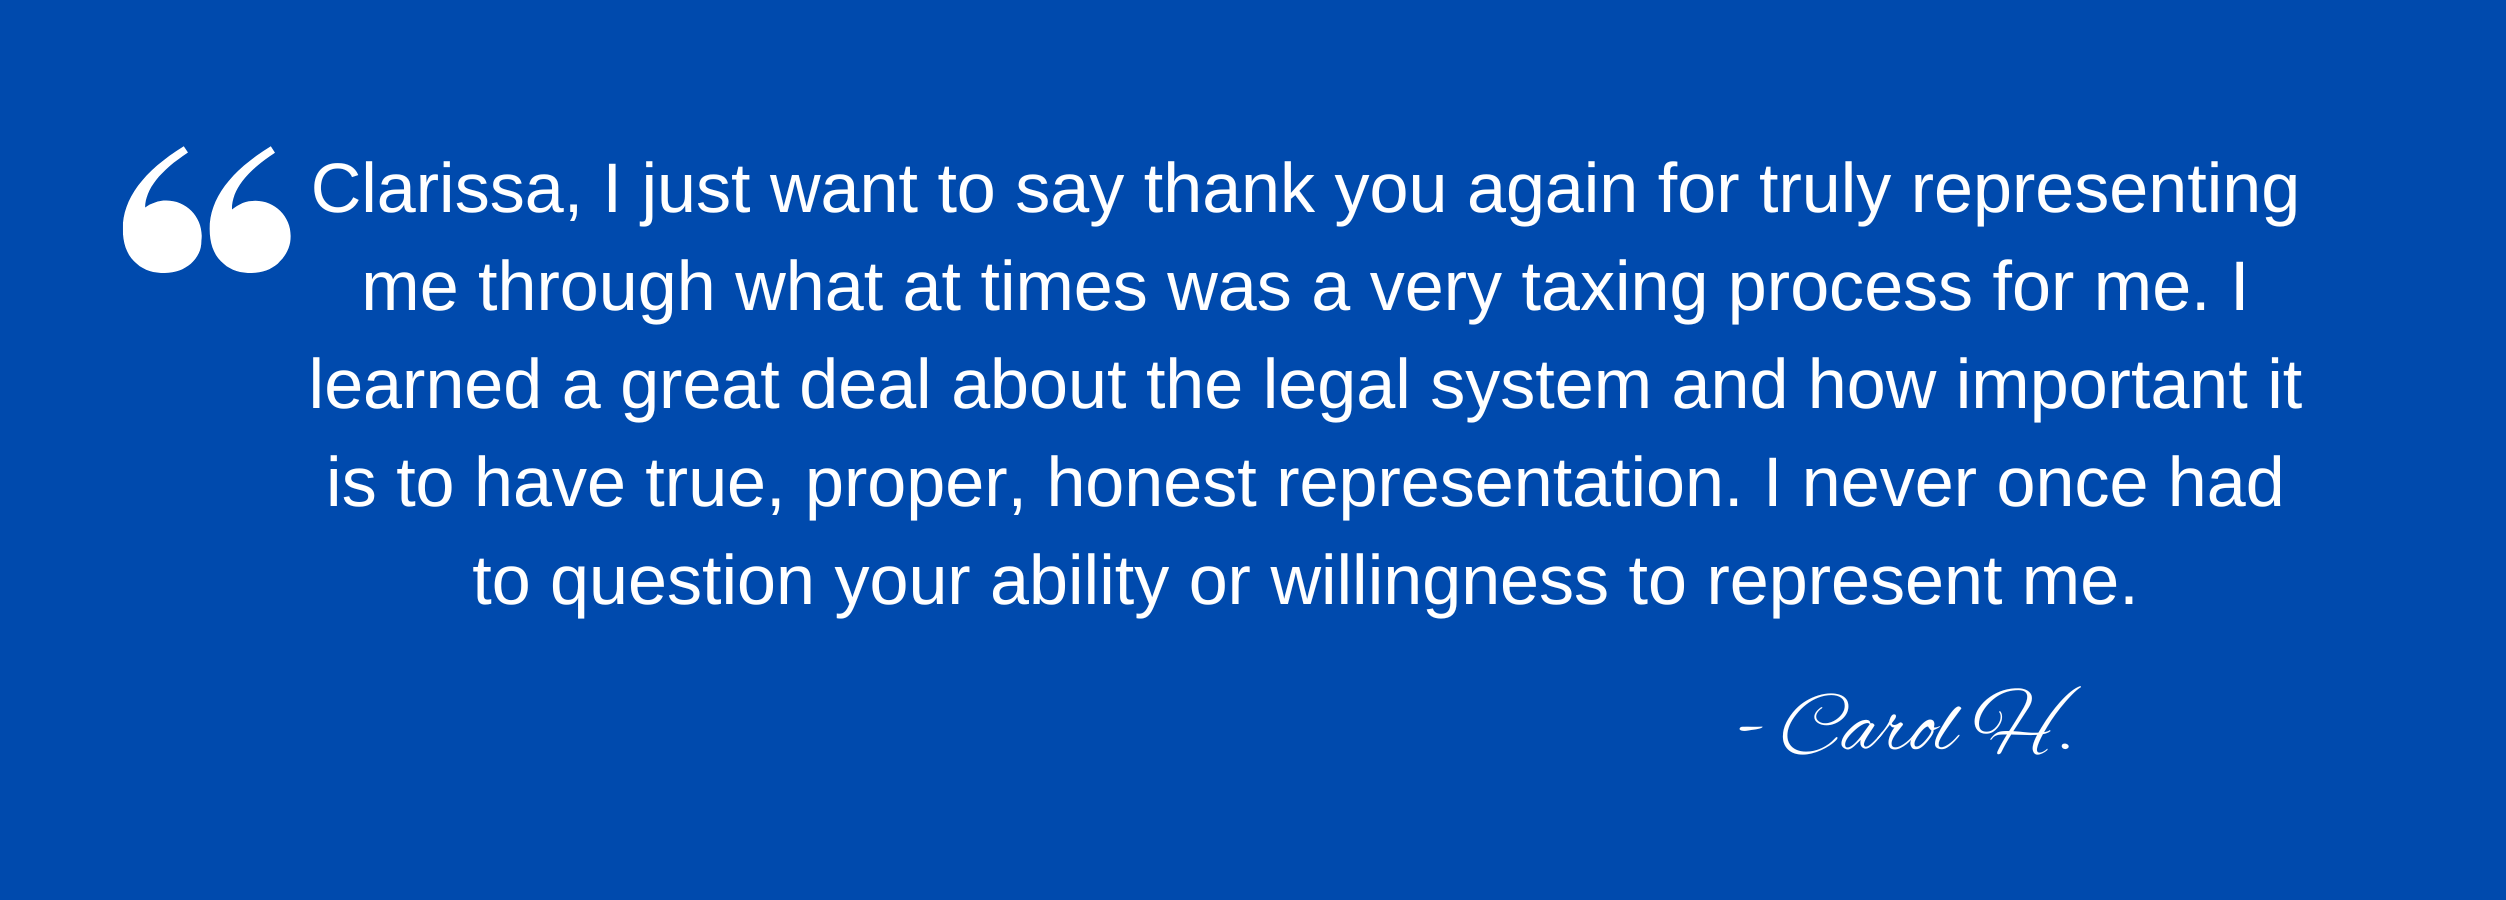 Clarissa, I just want to say thank you again for truly representing me through what at times was a very taxing process for me. I learned a great deal about the legal system and how important it is to have true, proper, honest representation. I never once had to question your ability or willingness to represent me. - Carol H.